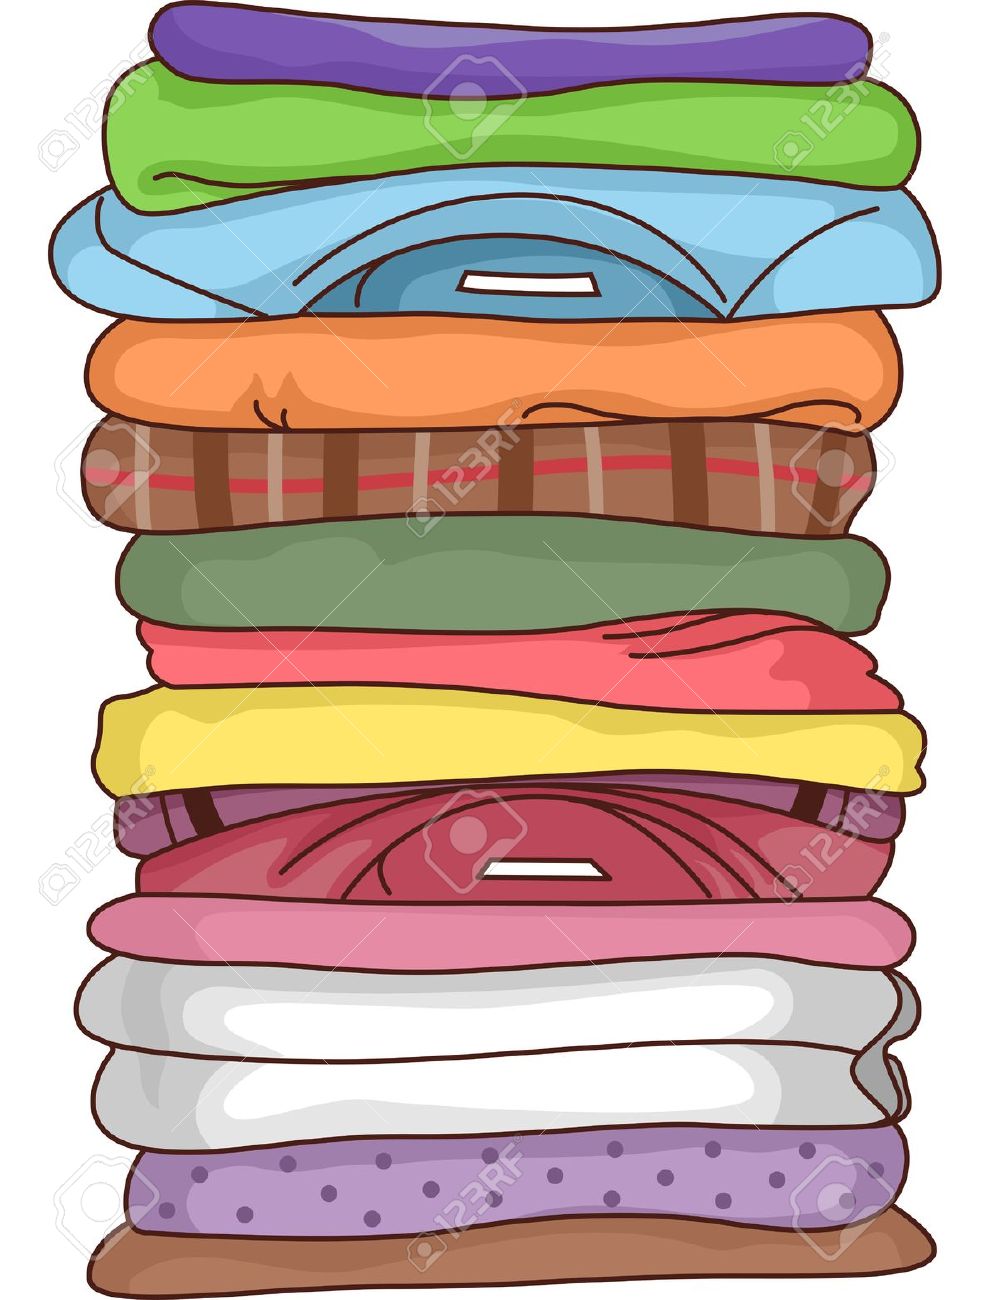 clipart pictures of clothes - photo #44